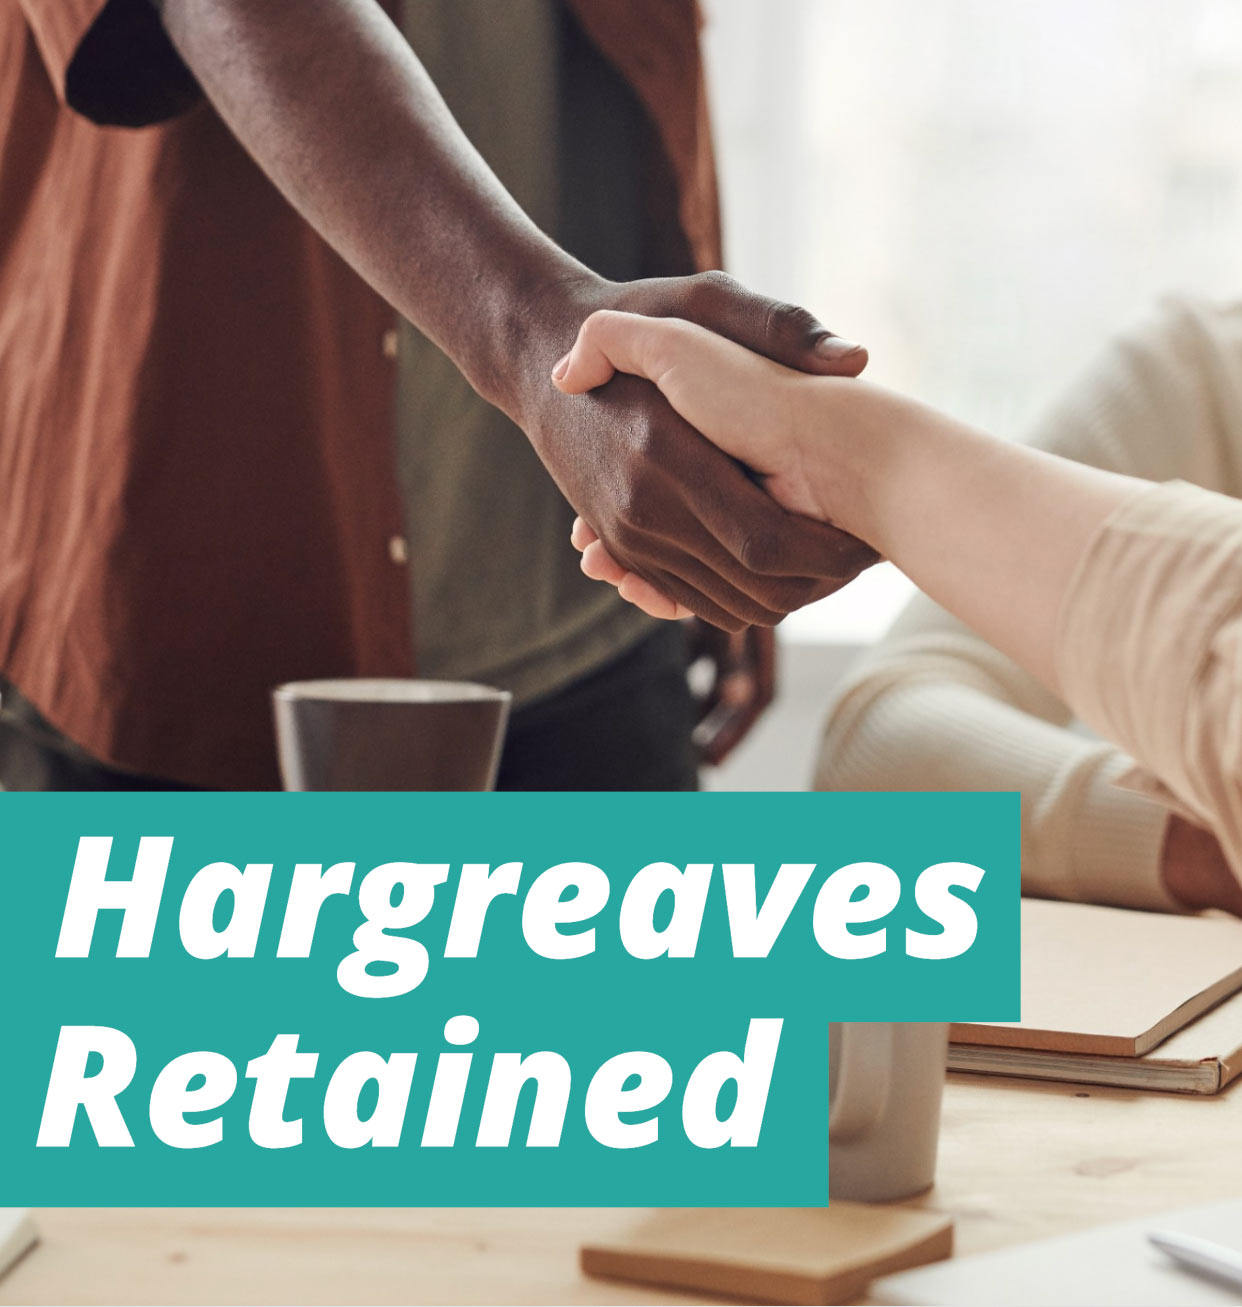 Hargreaves Retained - Hargreaves Recruitment